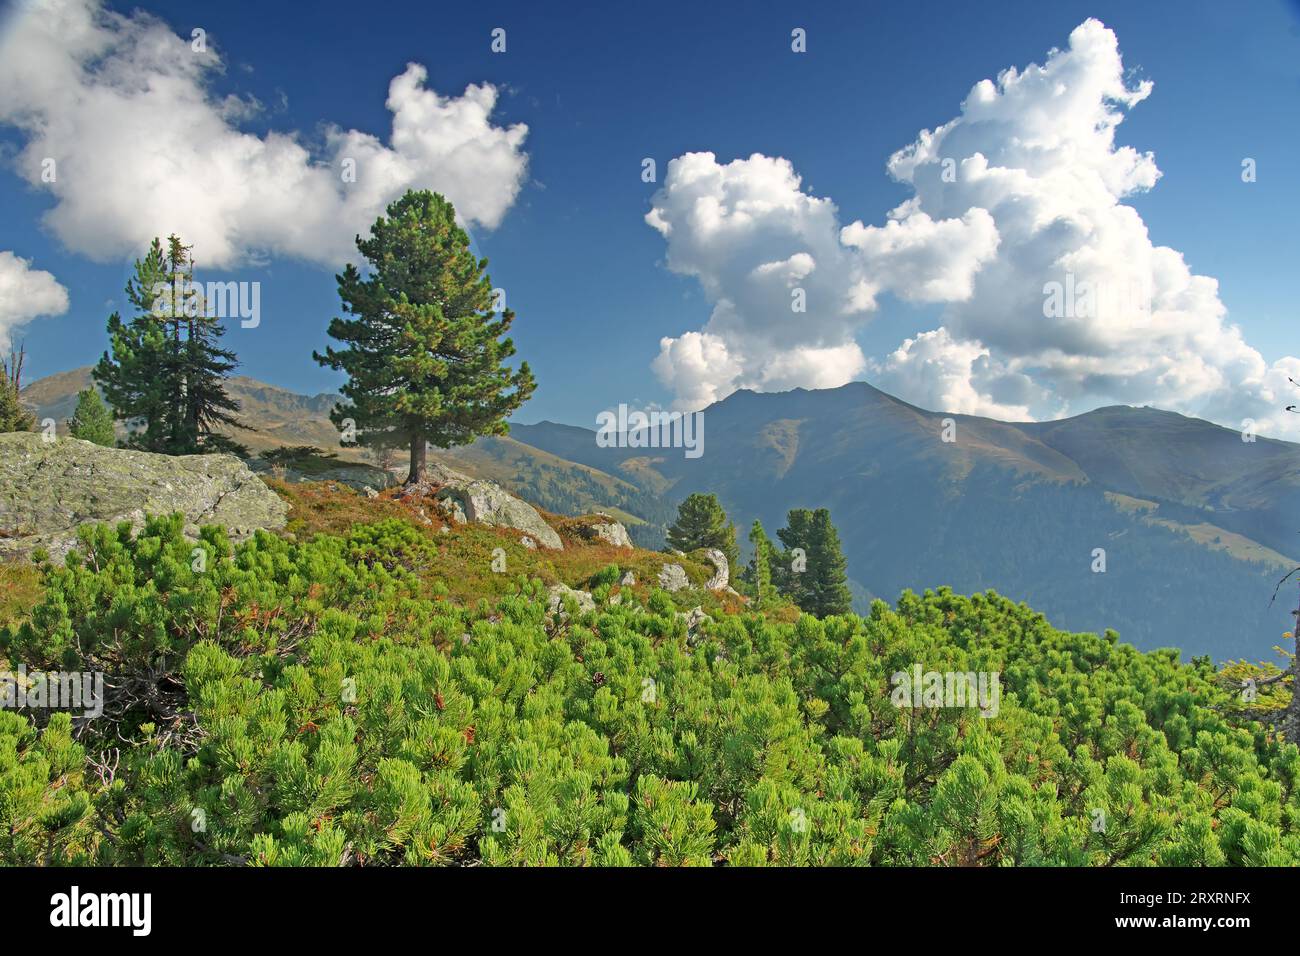 Mugo pines,(or dwarf mountain pines, creeping pines) and stone pines (or Arolla pines) on alpine hights above Gerlos, Zillertal. Backdrop: Koenigslei Stock Photo